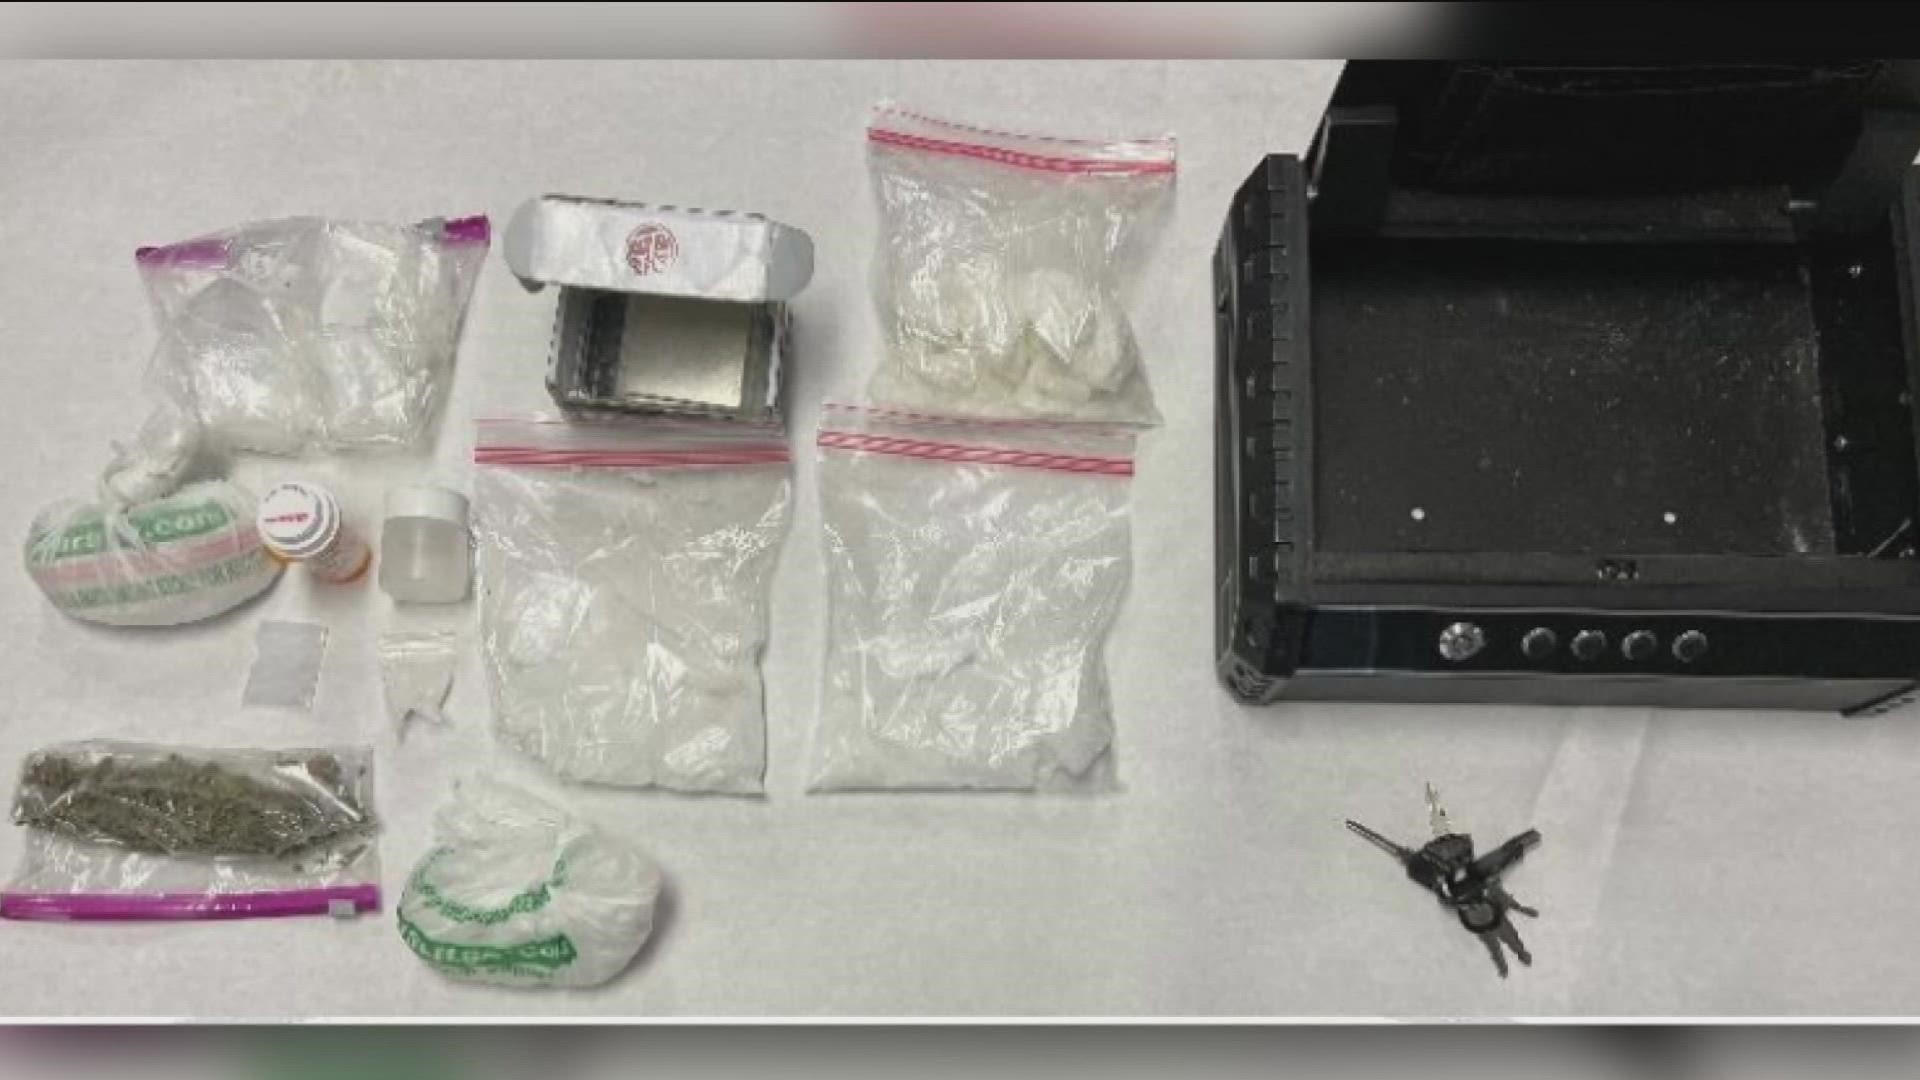 During the arrest, police located two pounds of Methamphetamine, five ounces of Marijuana, packing materials, scales, various paraphernalia, and a loaded firearm.